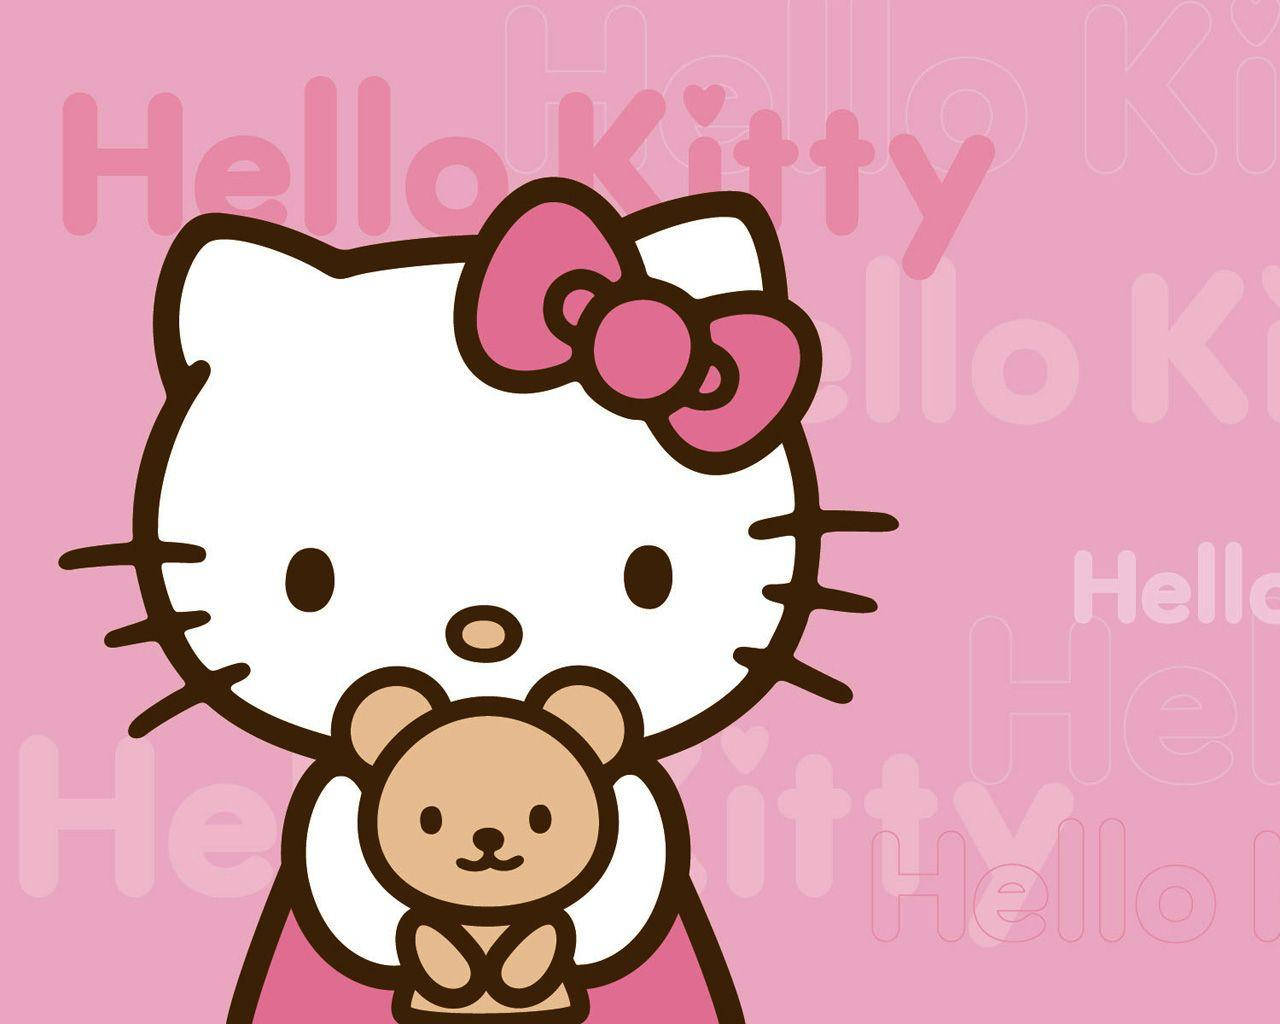 300+] Hello Kitty Wallpapers for FREE 